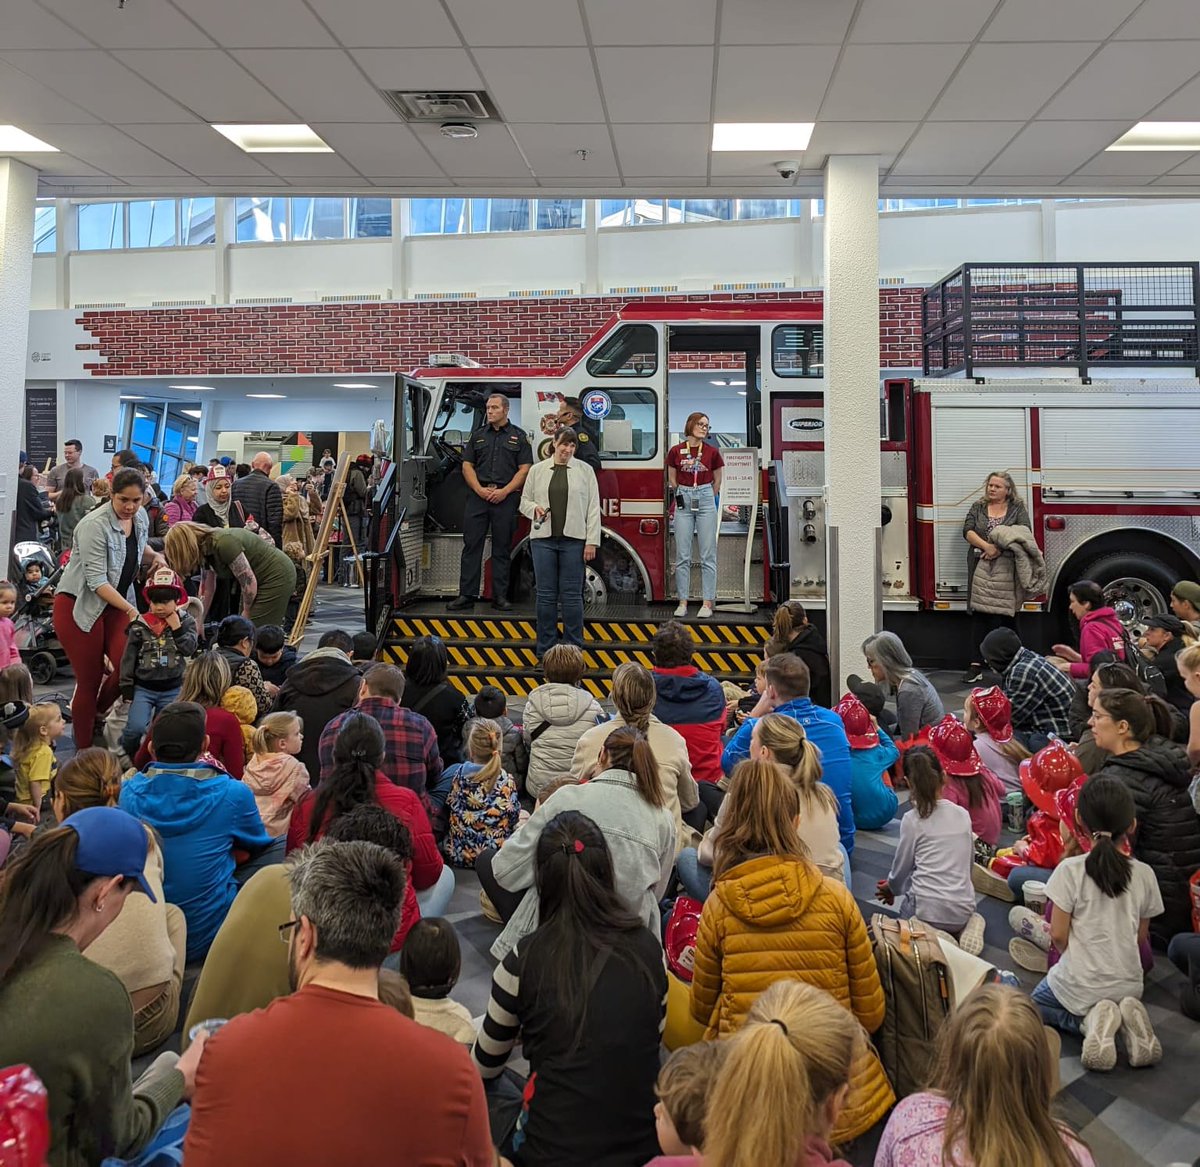 What an exciting Grand Opening of Engine 23 in Fish Creek Public Library! It was so much fun to see so many kiddos lined up with their families, excited to meet the Firefighters & see the new engine addition! #yycAcadia #calgaryLibrary @calgarylibrary